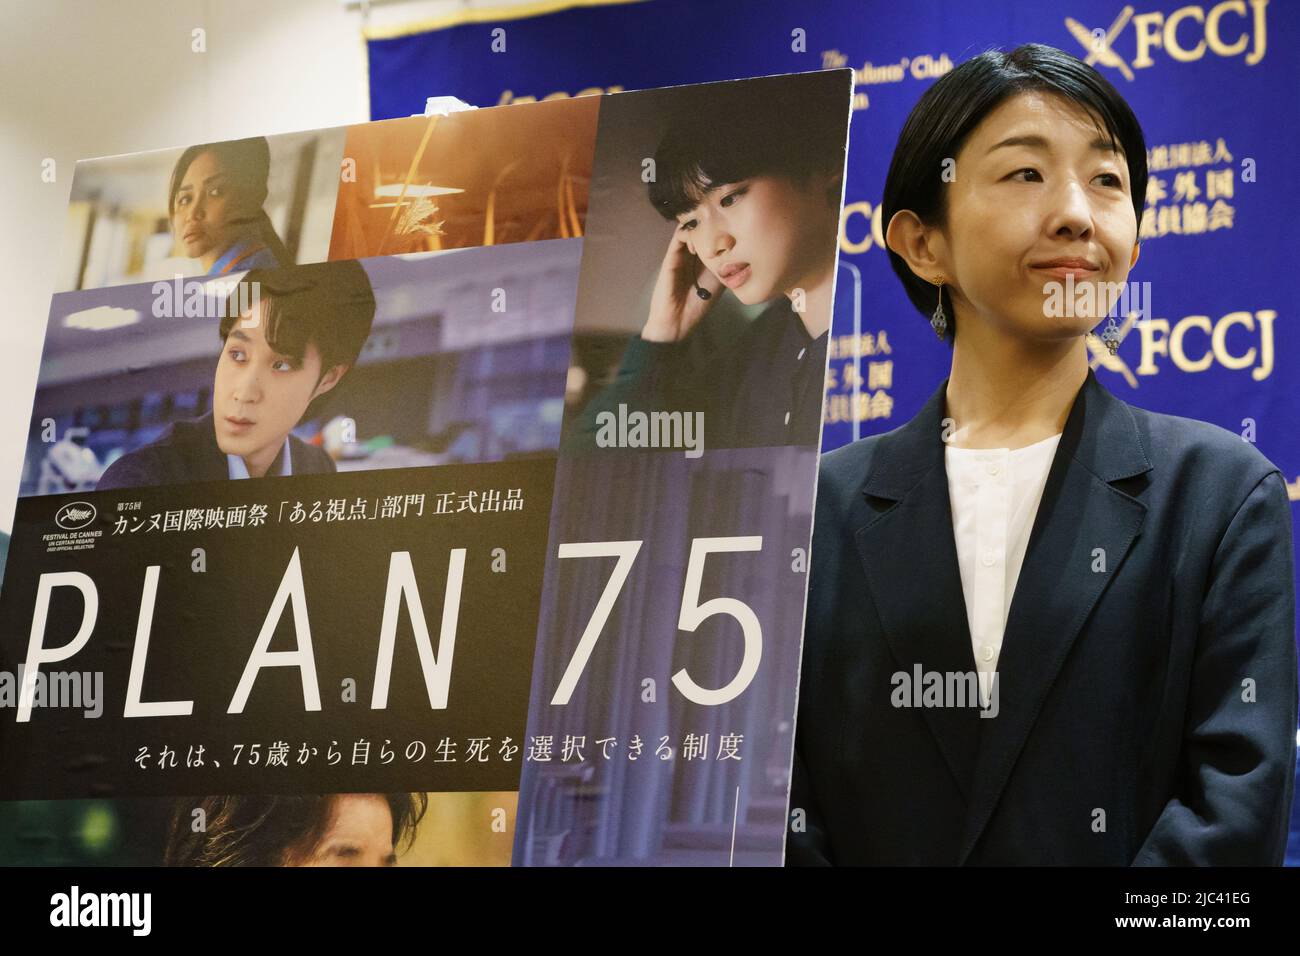 Director Chie Hayakawa of the winner of the Special Mention at the 75th annual Cannes film festival attends Q & A after the screening of film 'PLAN 75' at The Foreign Correspondents' Club of Japan in Tokyo, Japan on June 7, 2022. (Photo Motoo Naka/AFLO) Stock Photo